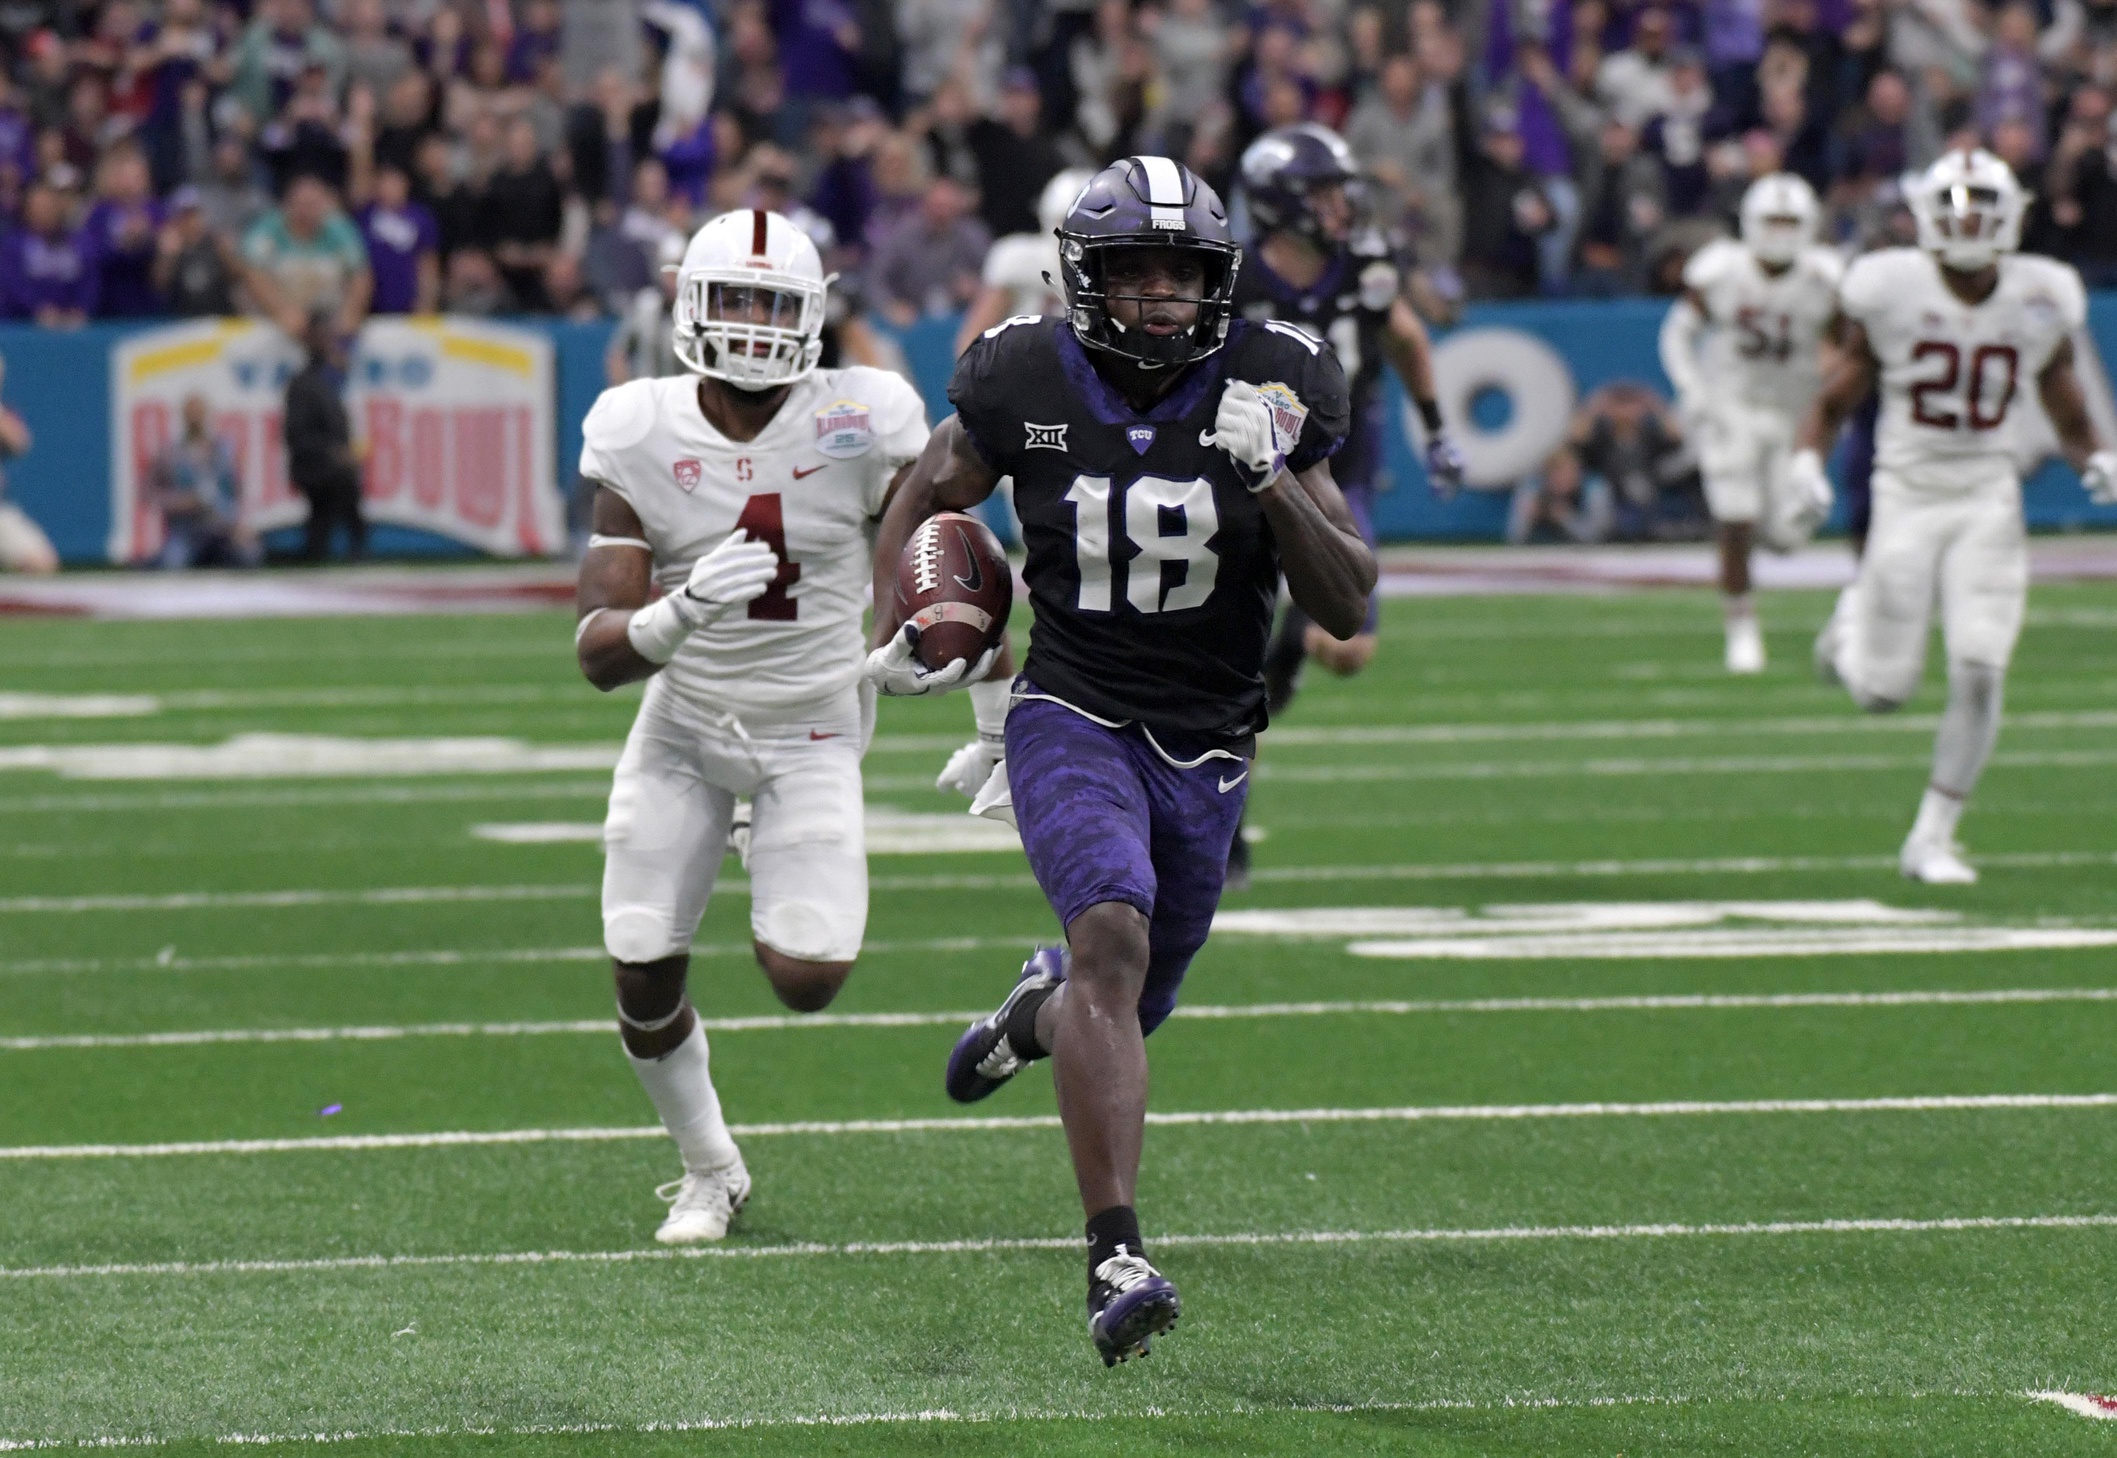 Dec 28, 2017; San Antonio, TX, United States; TCU Horned Frogs wide receiver Jalen Reagor (18) scores on a 93-yard touchdown reception in the third quarter against the Stanford Cardinal the 2017 Alamo Bowl at Alamodome. TCU defeated Stanford 39-37. 